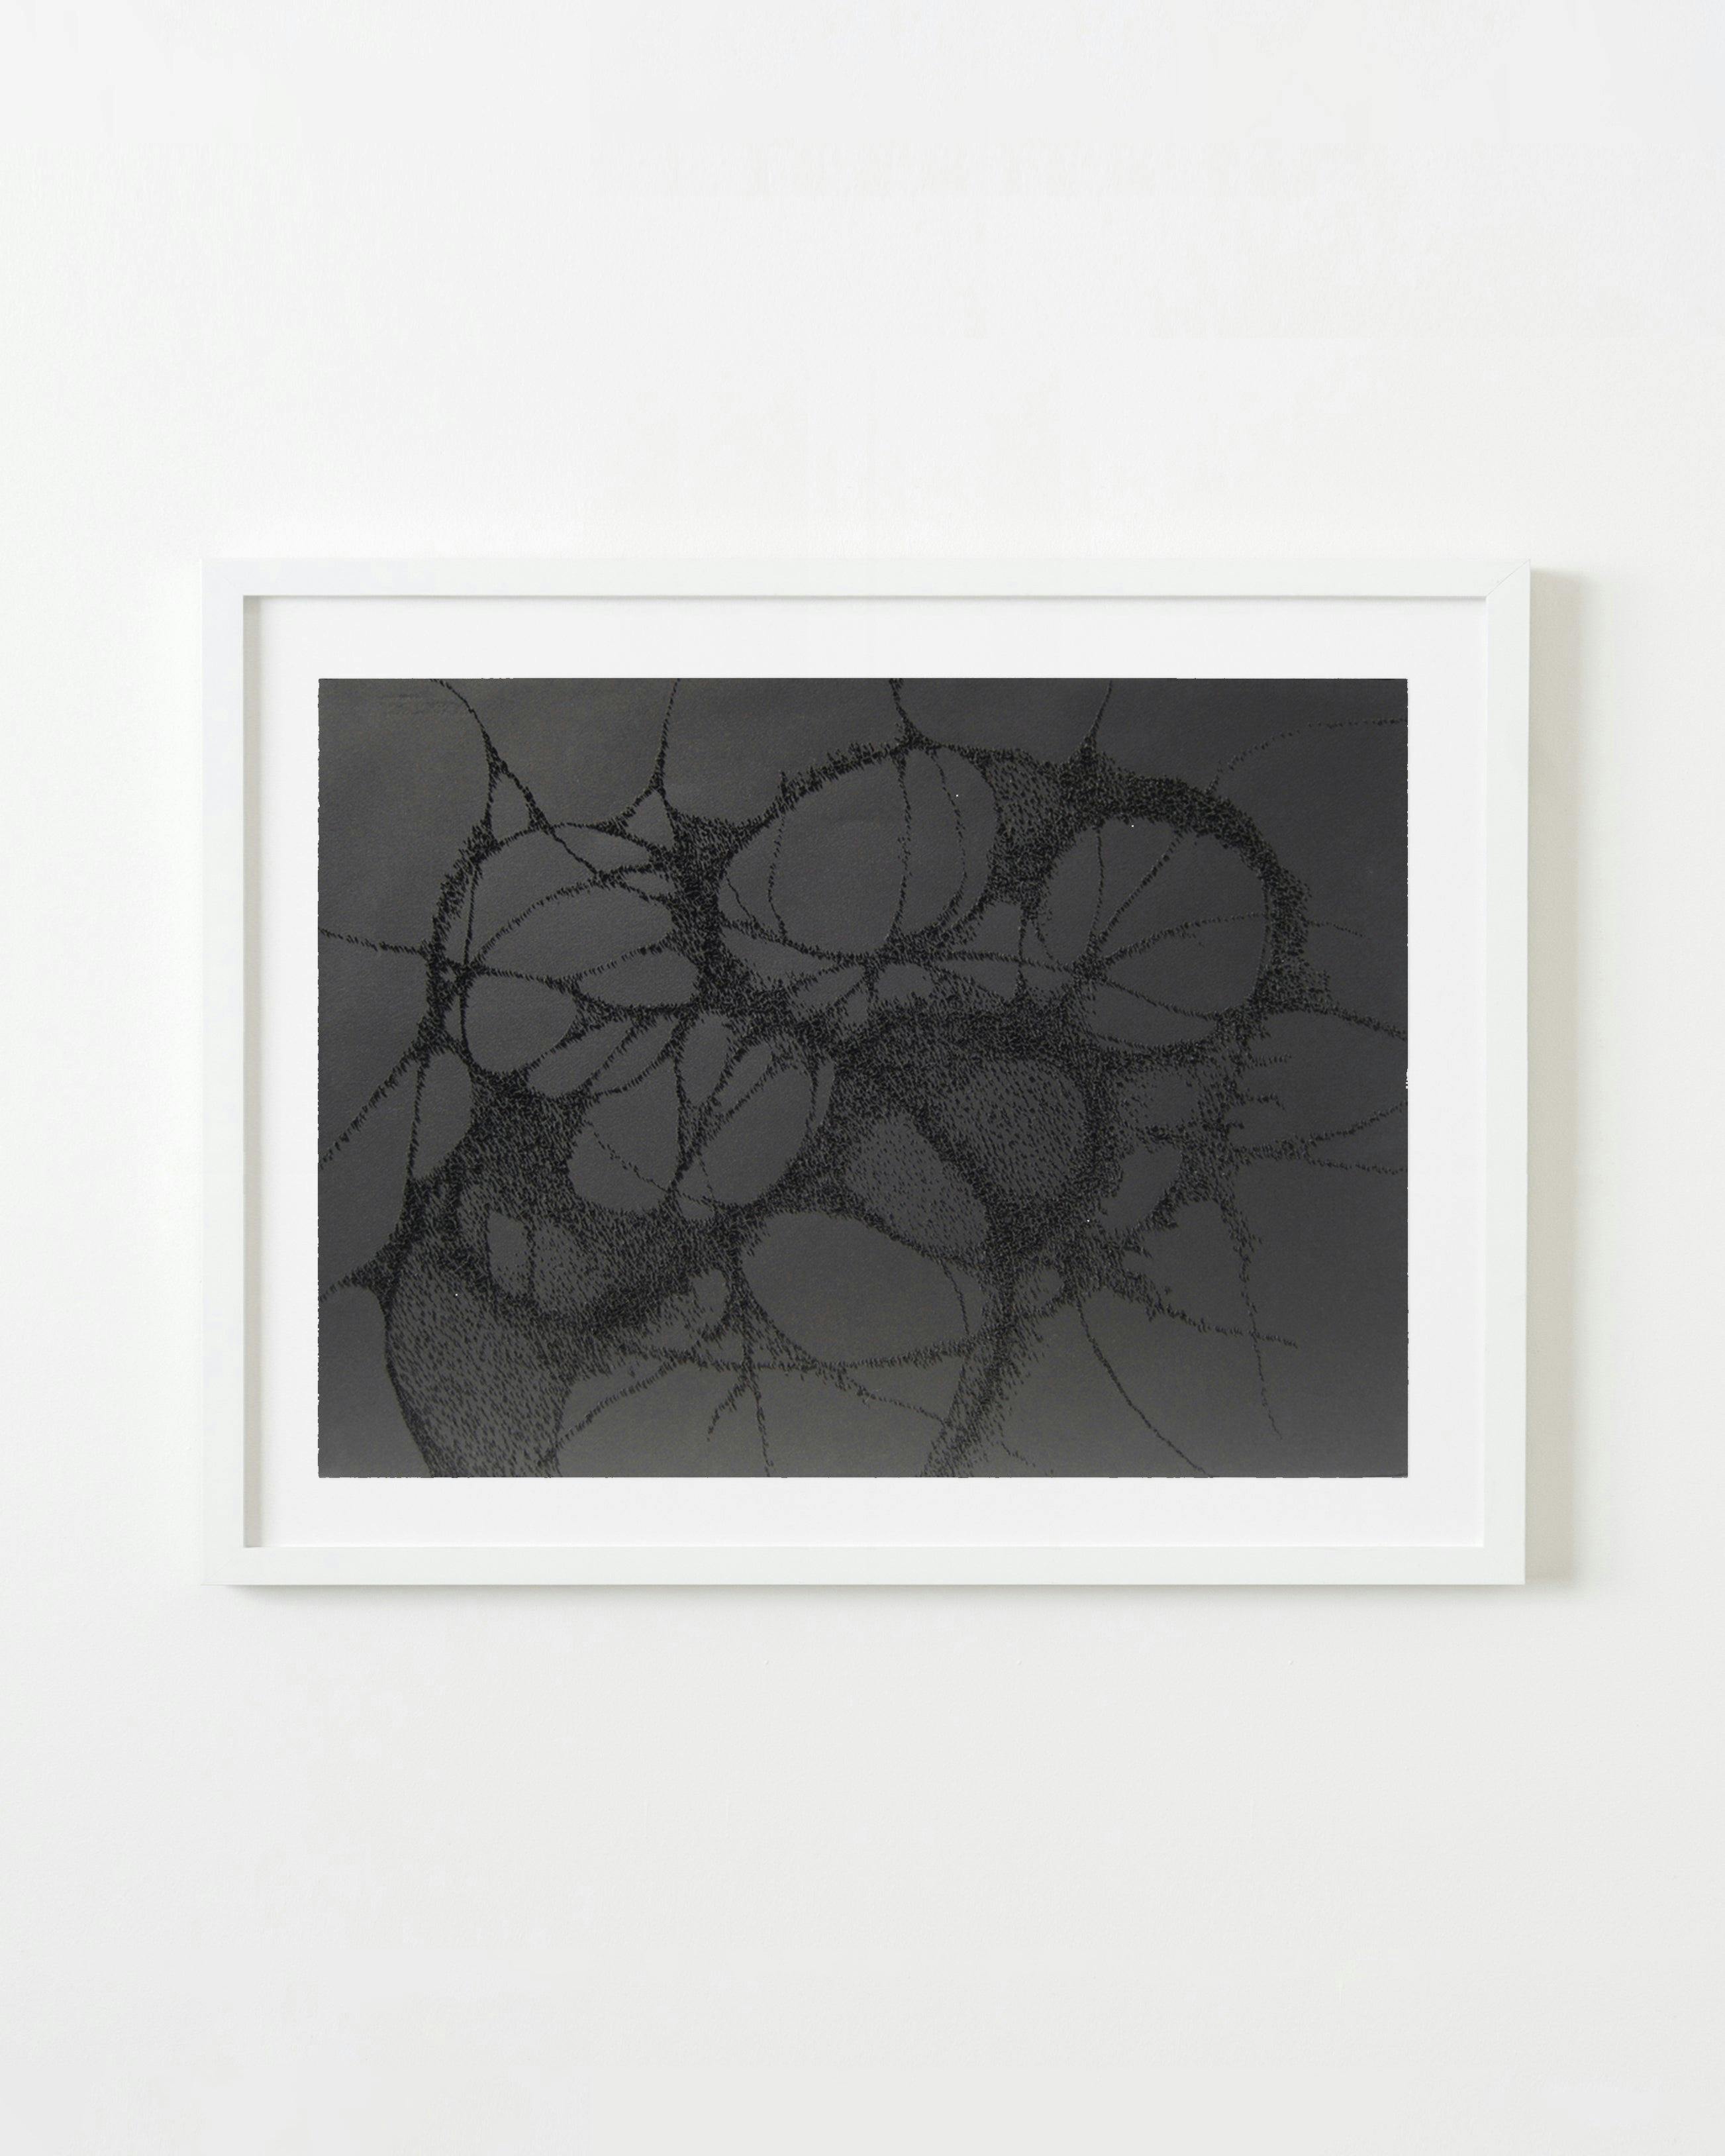 Drawing by Colleen Ho titled "Encumbered Patch".